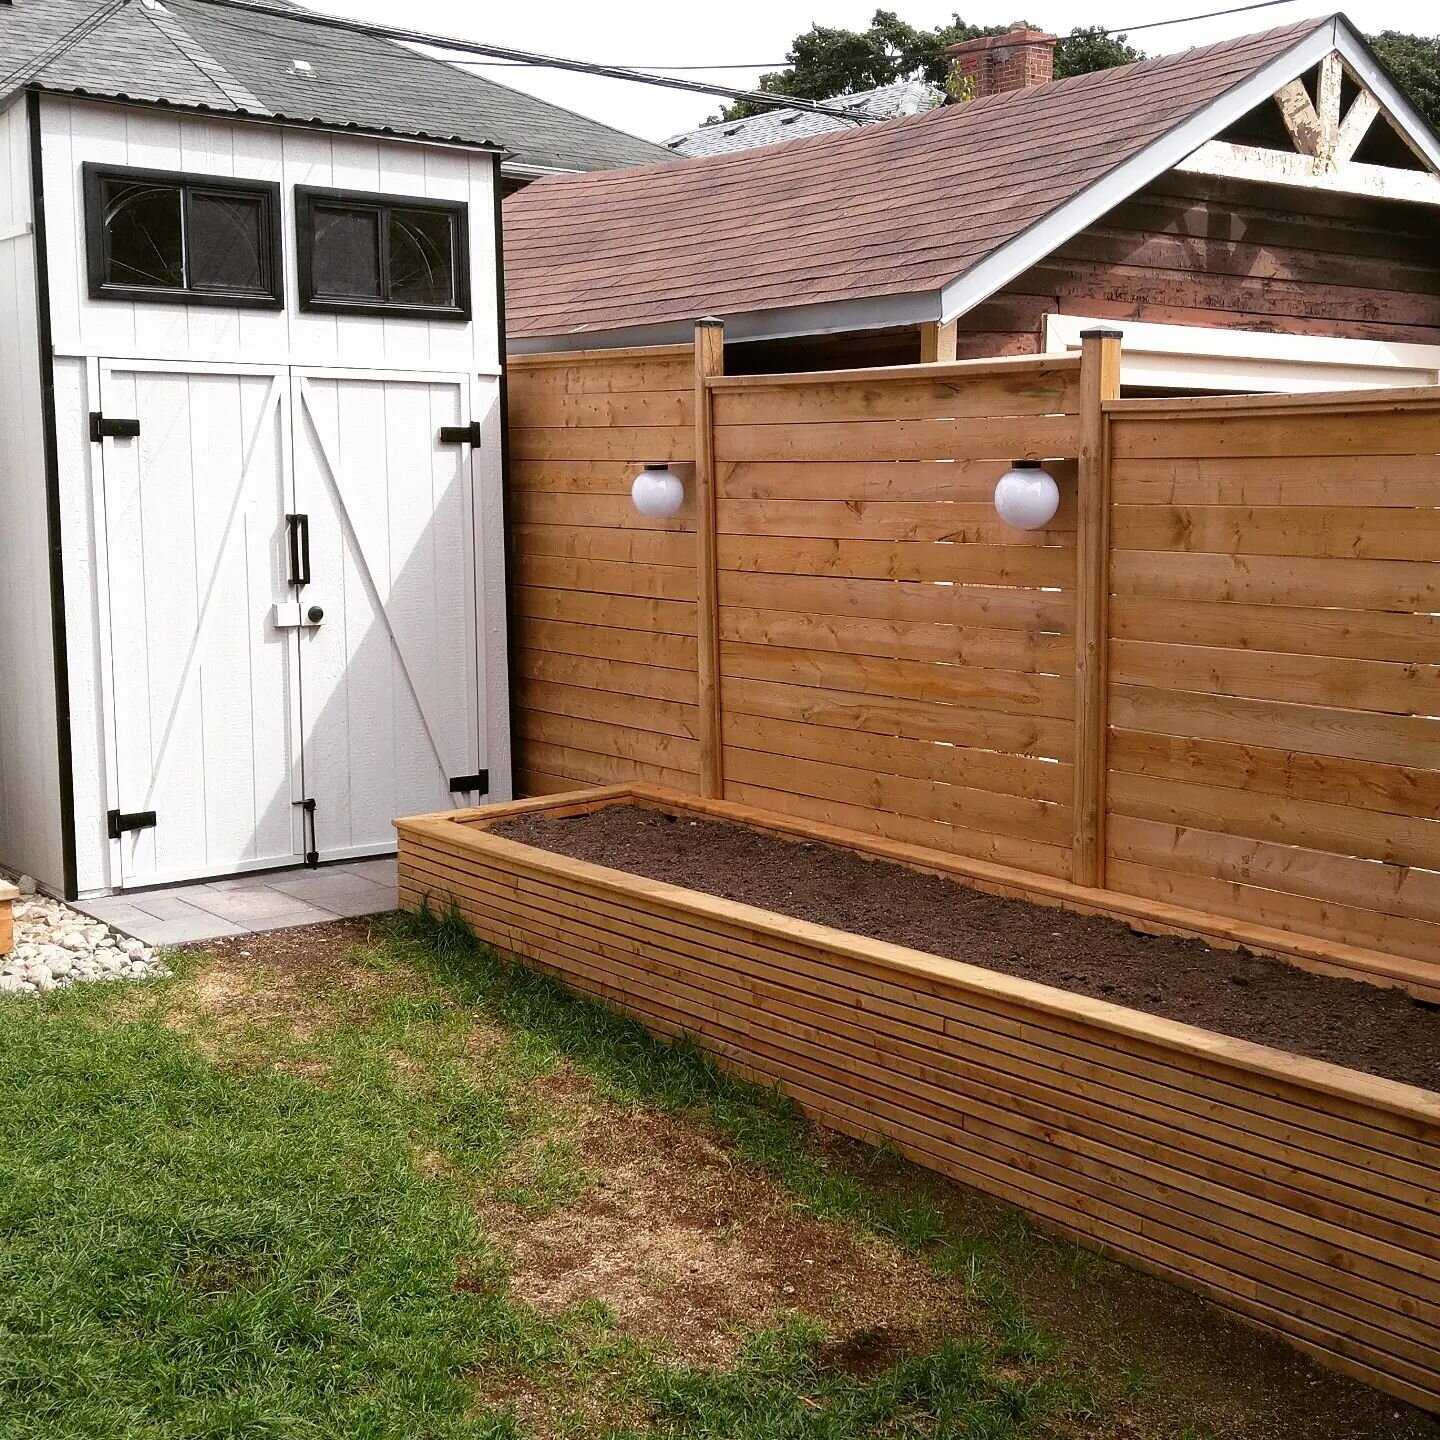 Custom storage shed, planter box &amp; fence utilizing the space in this small but very functional back yard